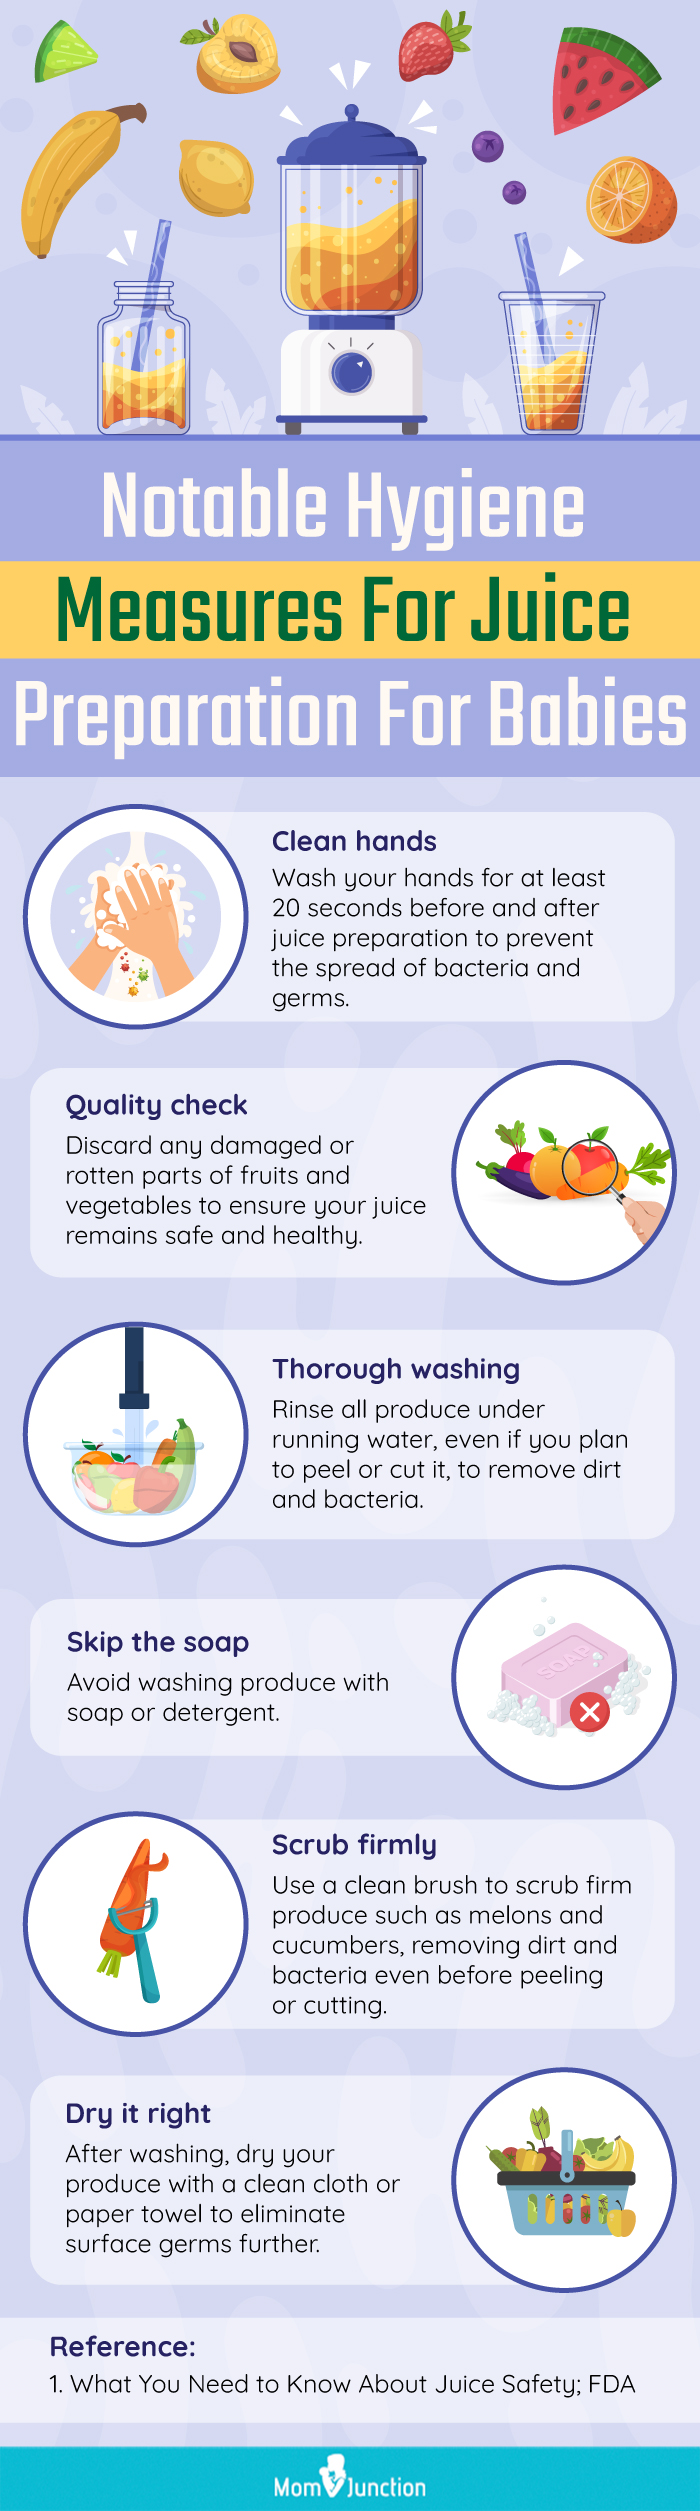 How To Wash Fruits and Vegetables The Right Way - The Produce Moms